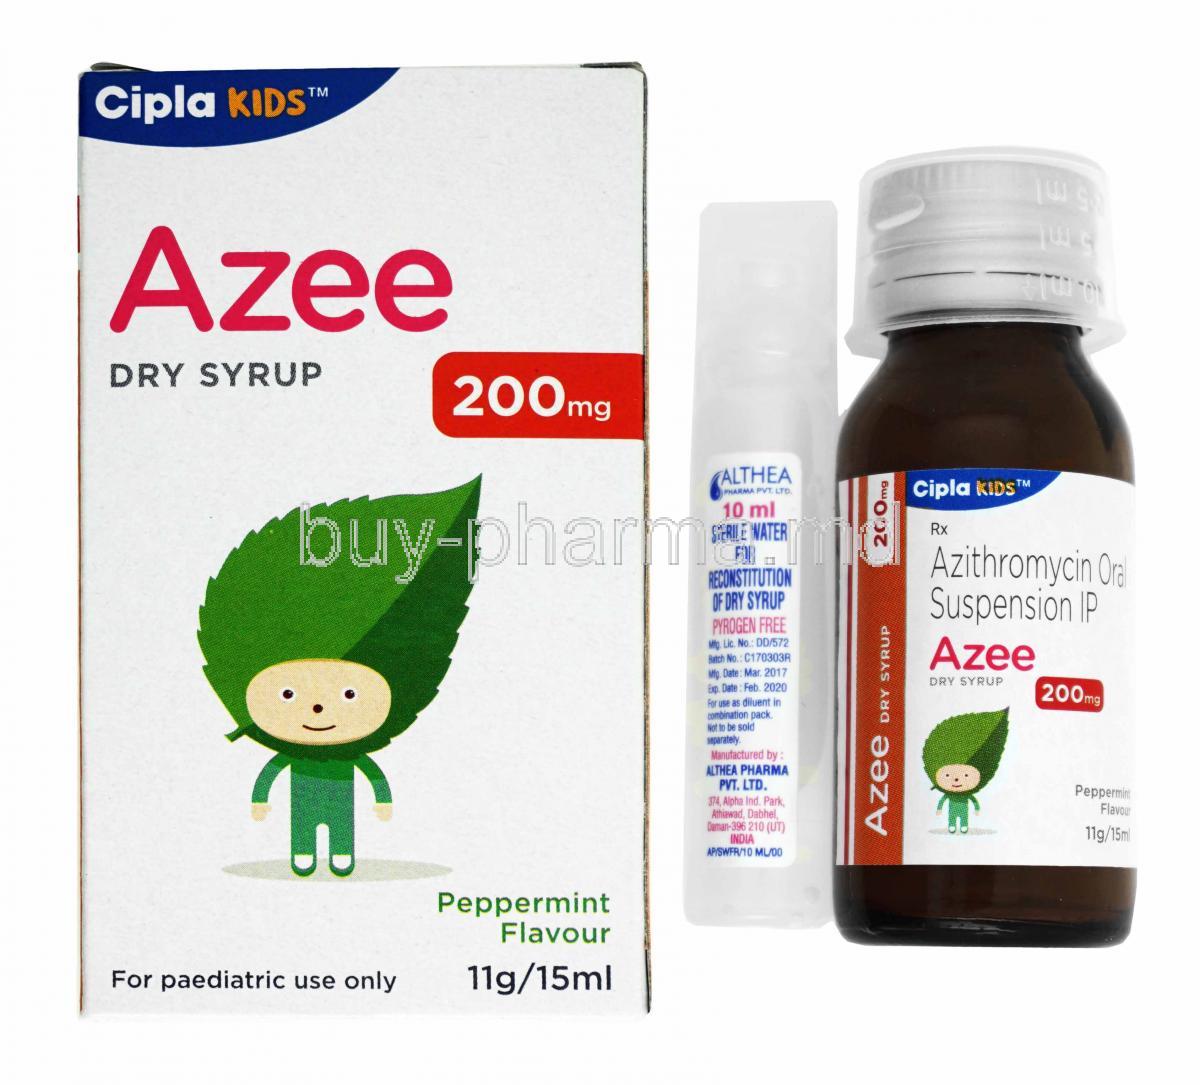 Azee Dry Syrup Peppermint Flavour 15ml Azithromycin 200mg box and bottle